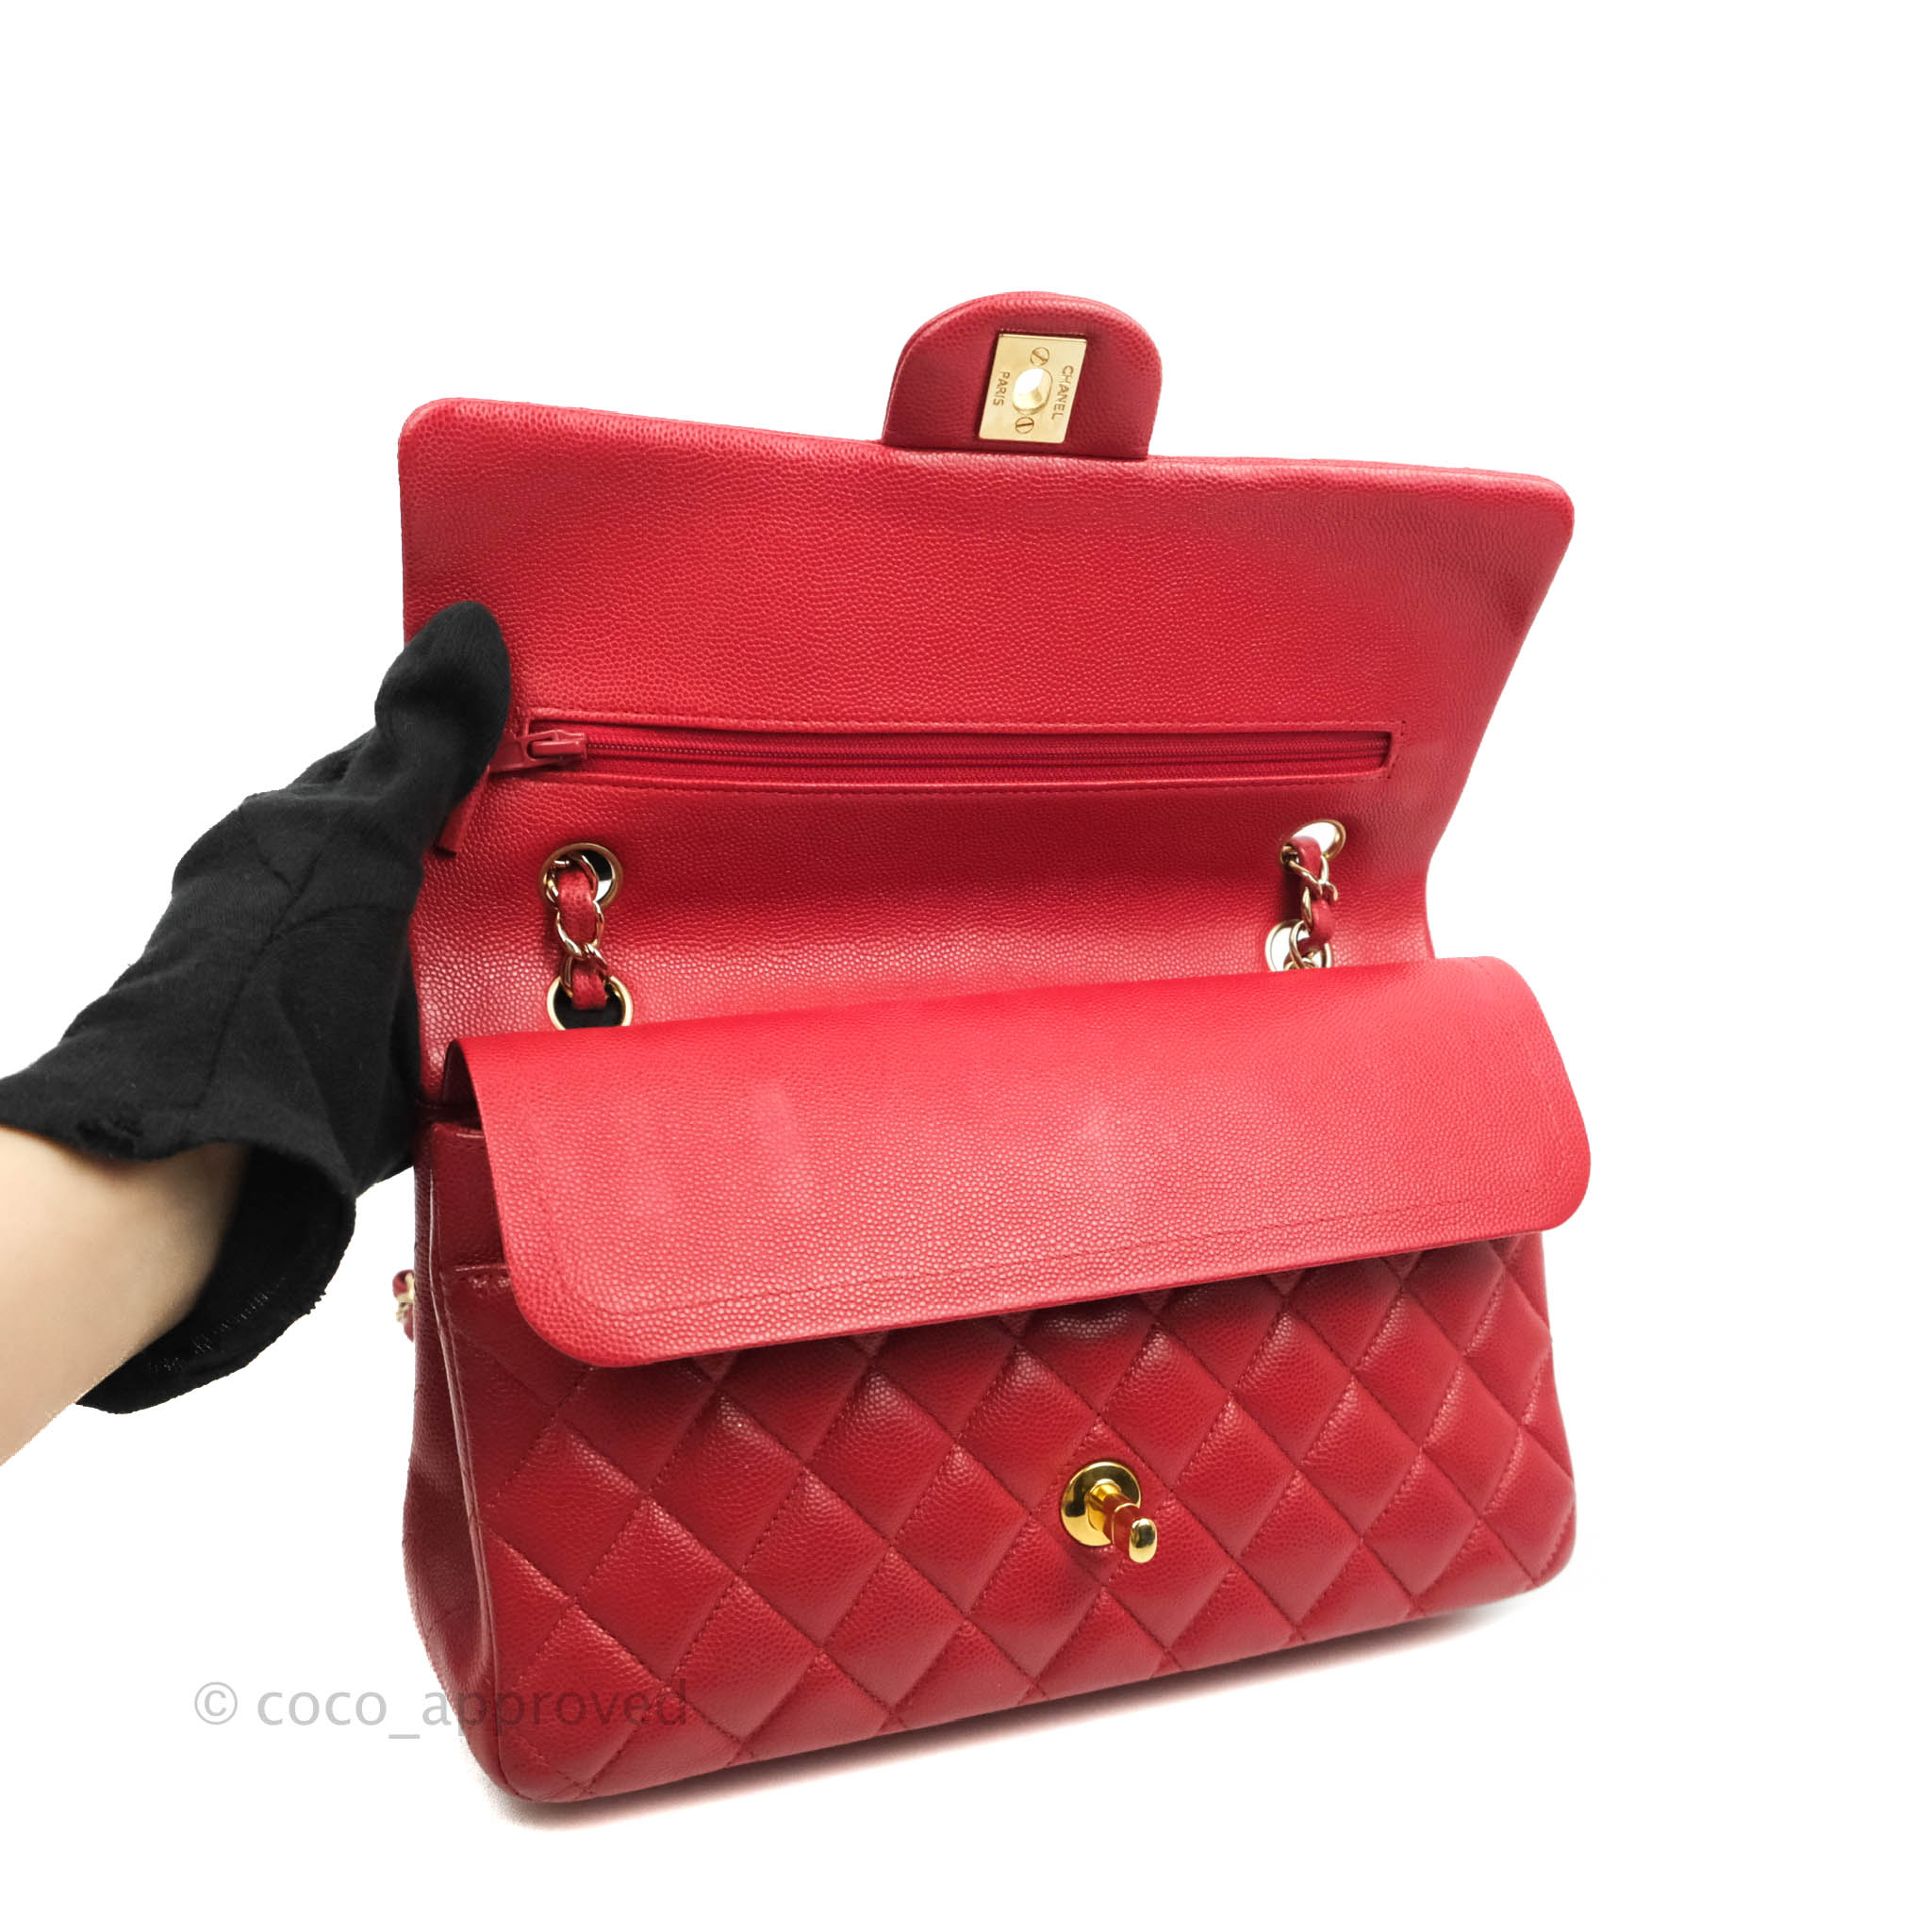 (Limited Edition) Authentic Gold Class Double CC Bag in Red